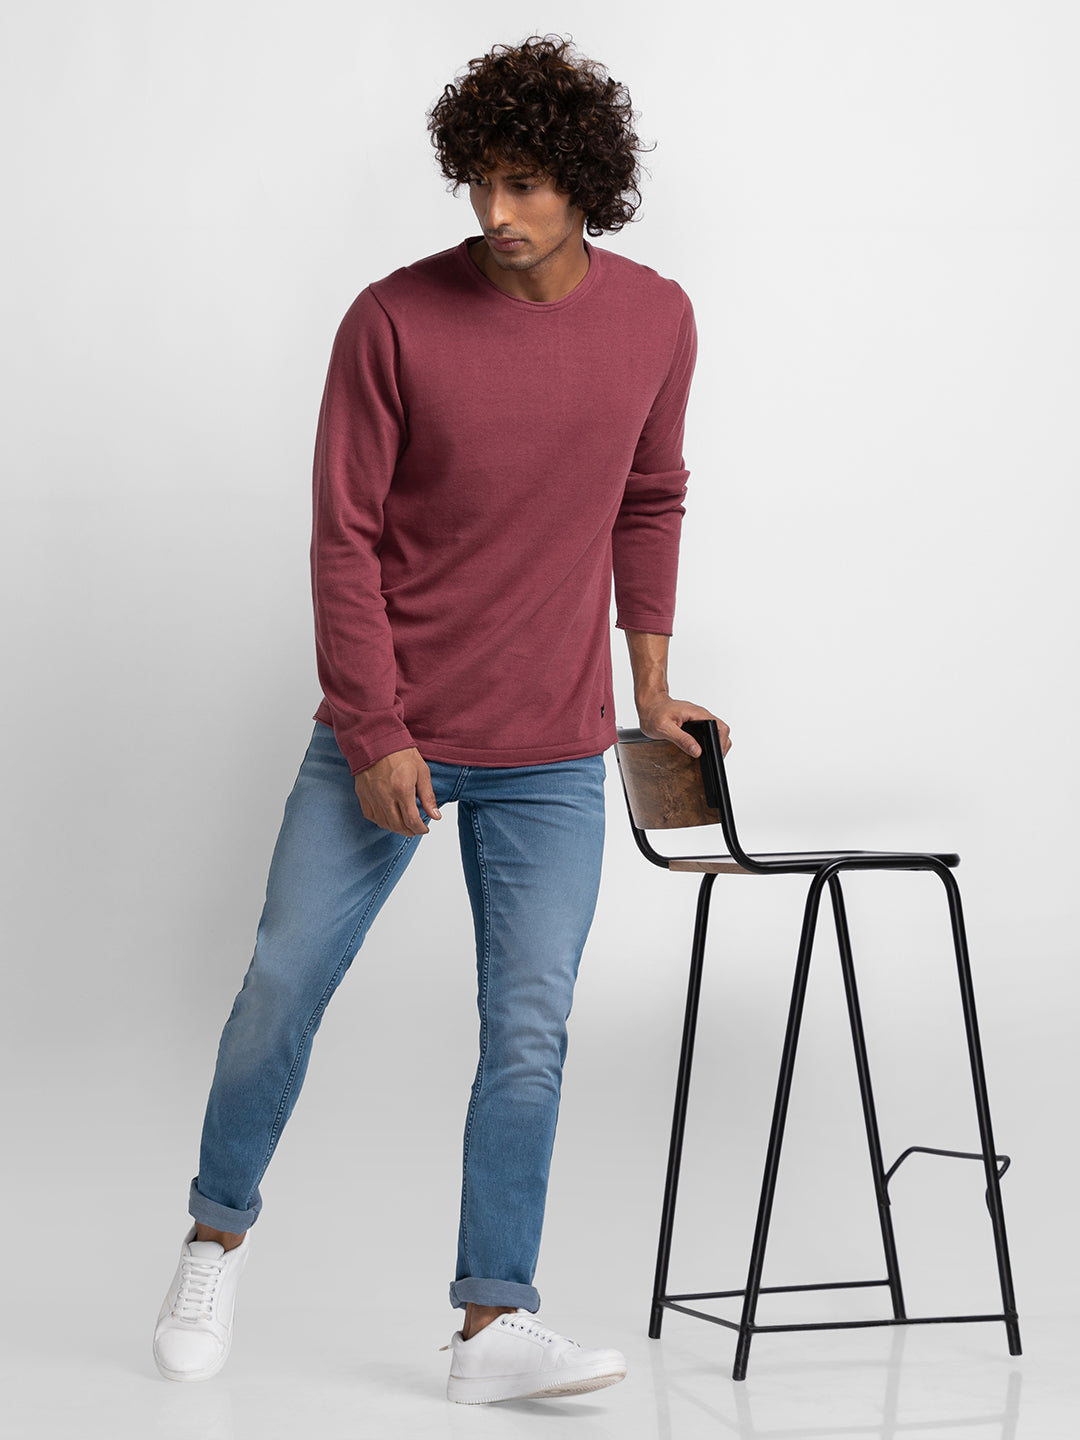 Spykar Mauve Red Cotton Full Sleeve Casual Sweater For Men